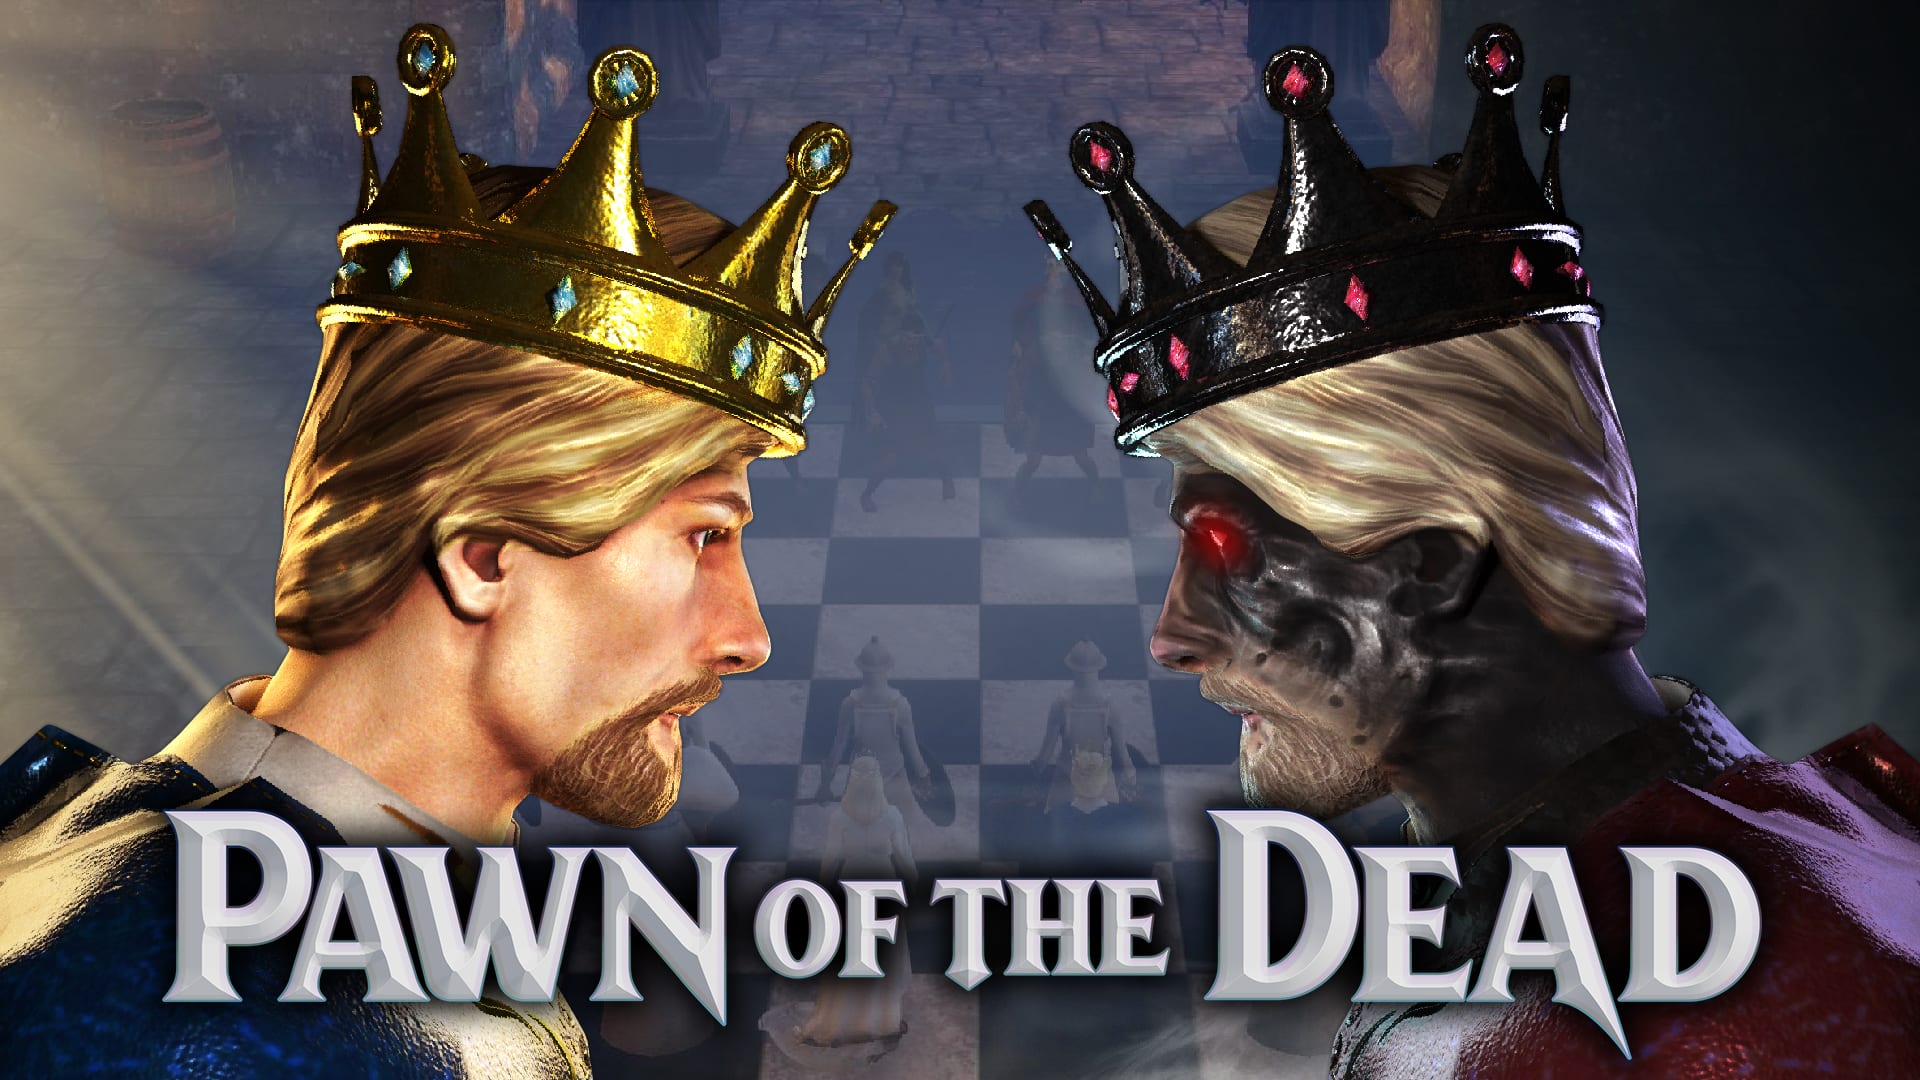 Pawn of the Dead